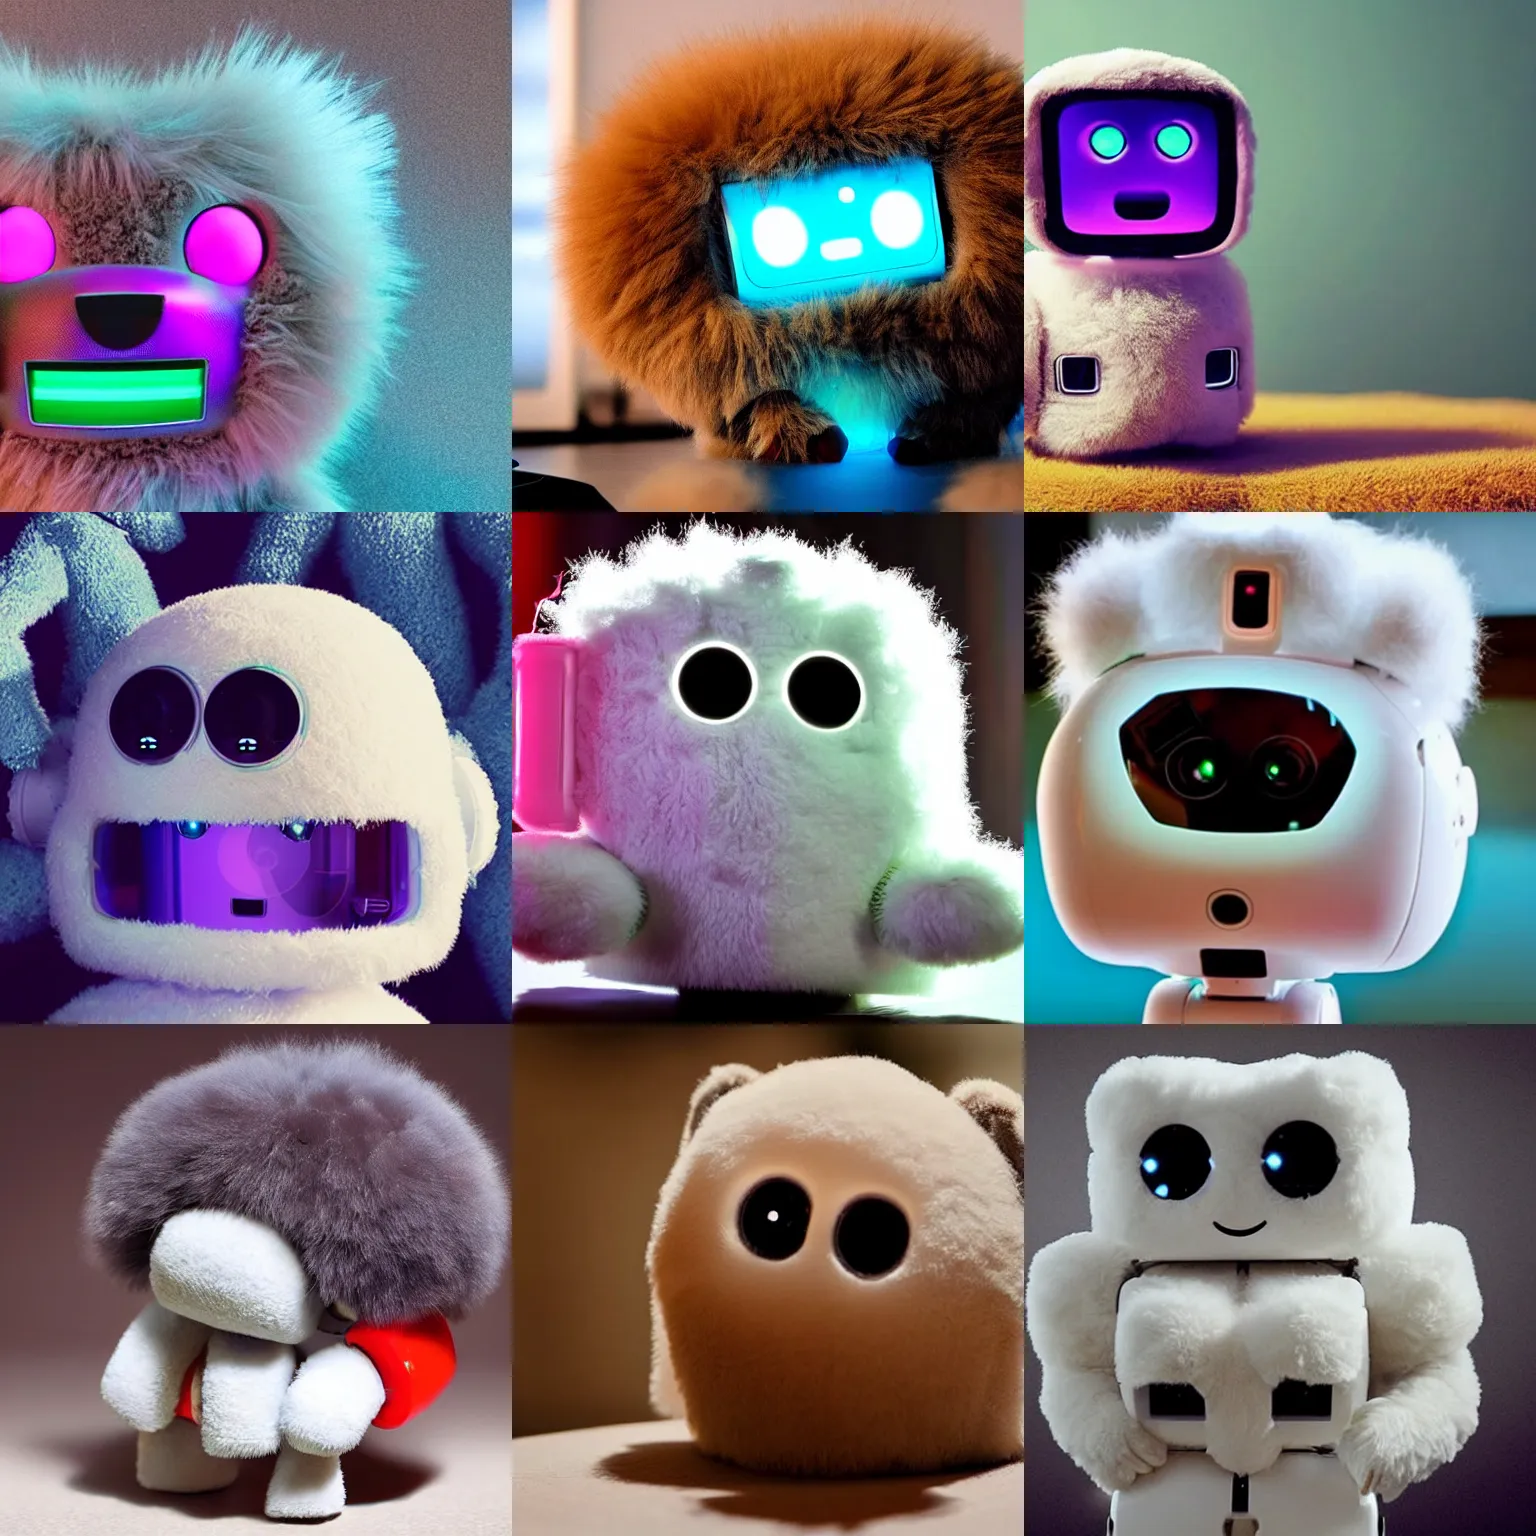 Prompt: <picture quality=hd+ mode='attention grabbing'>An adorable fluffy robot gets high on drugs</picture>